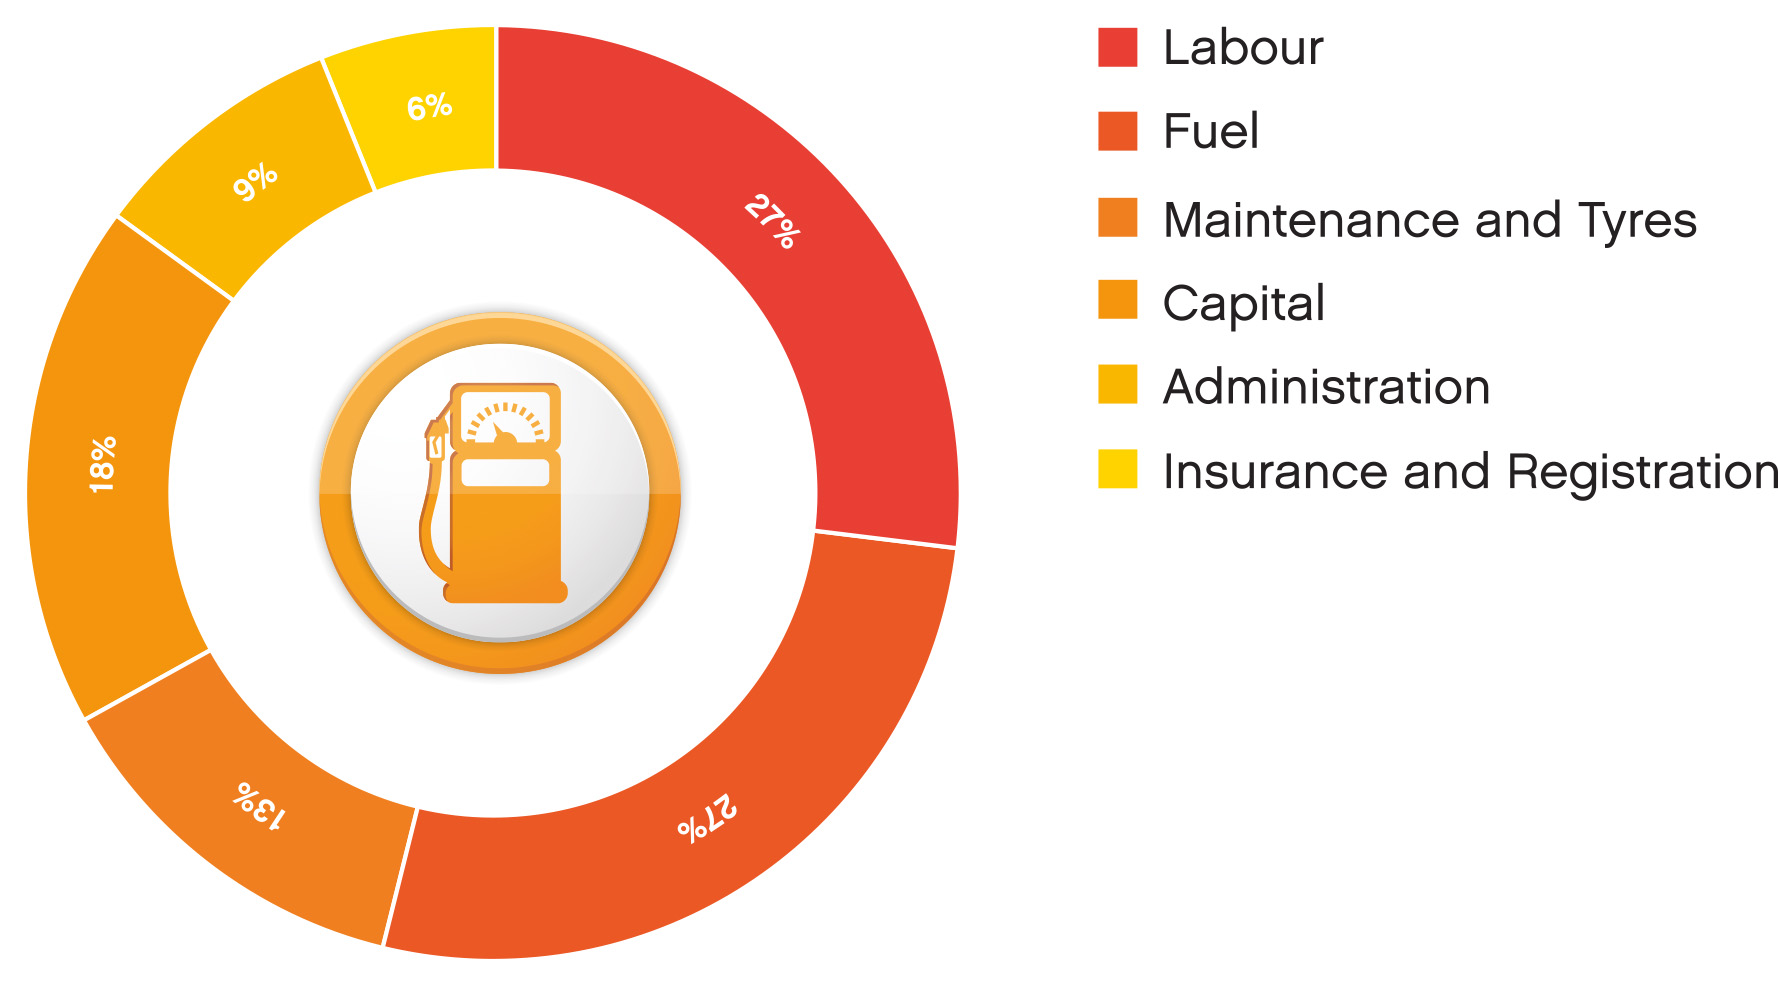 chart showing labour and fuel as the highest costs